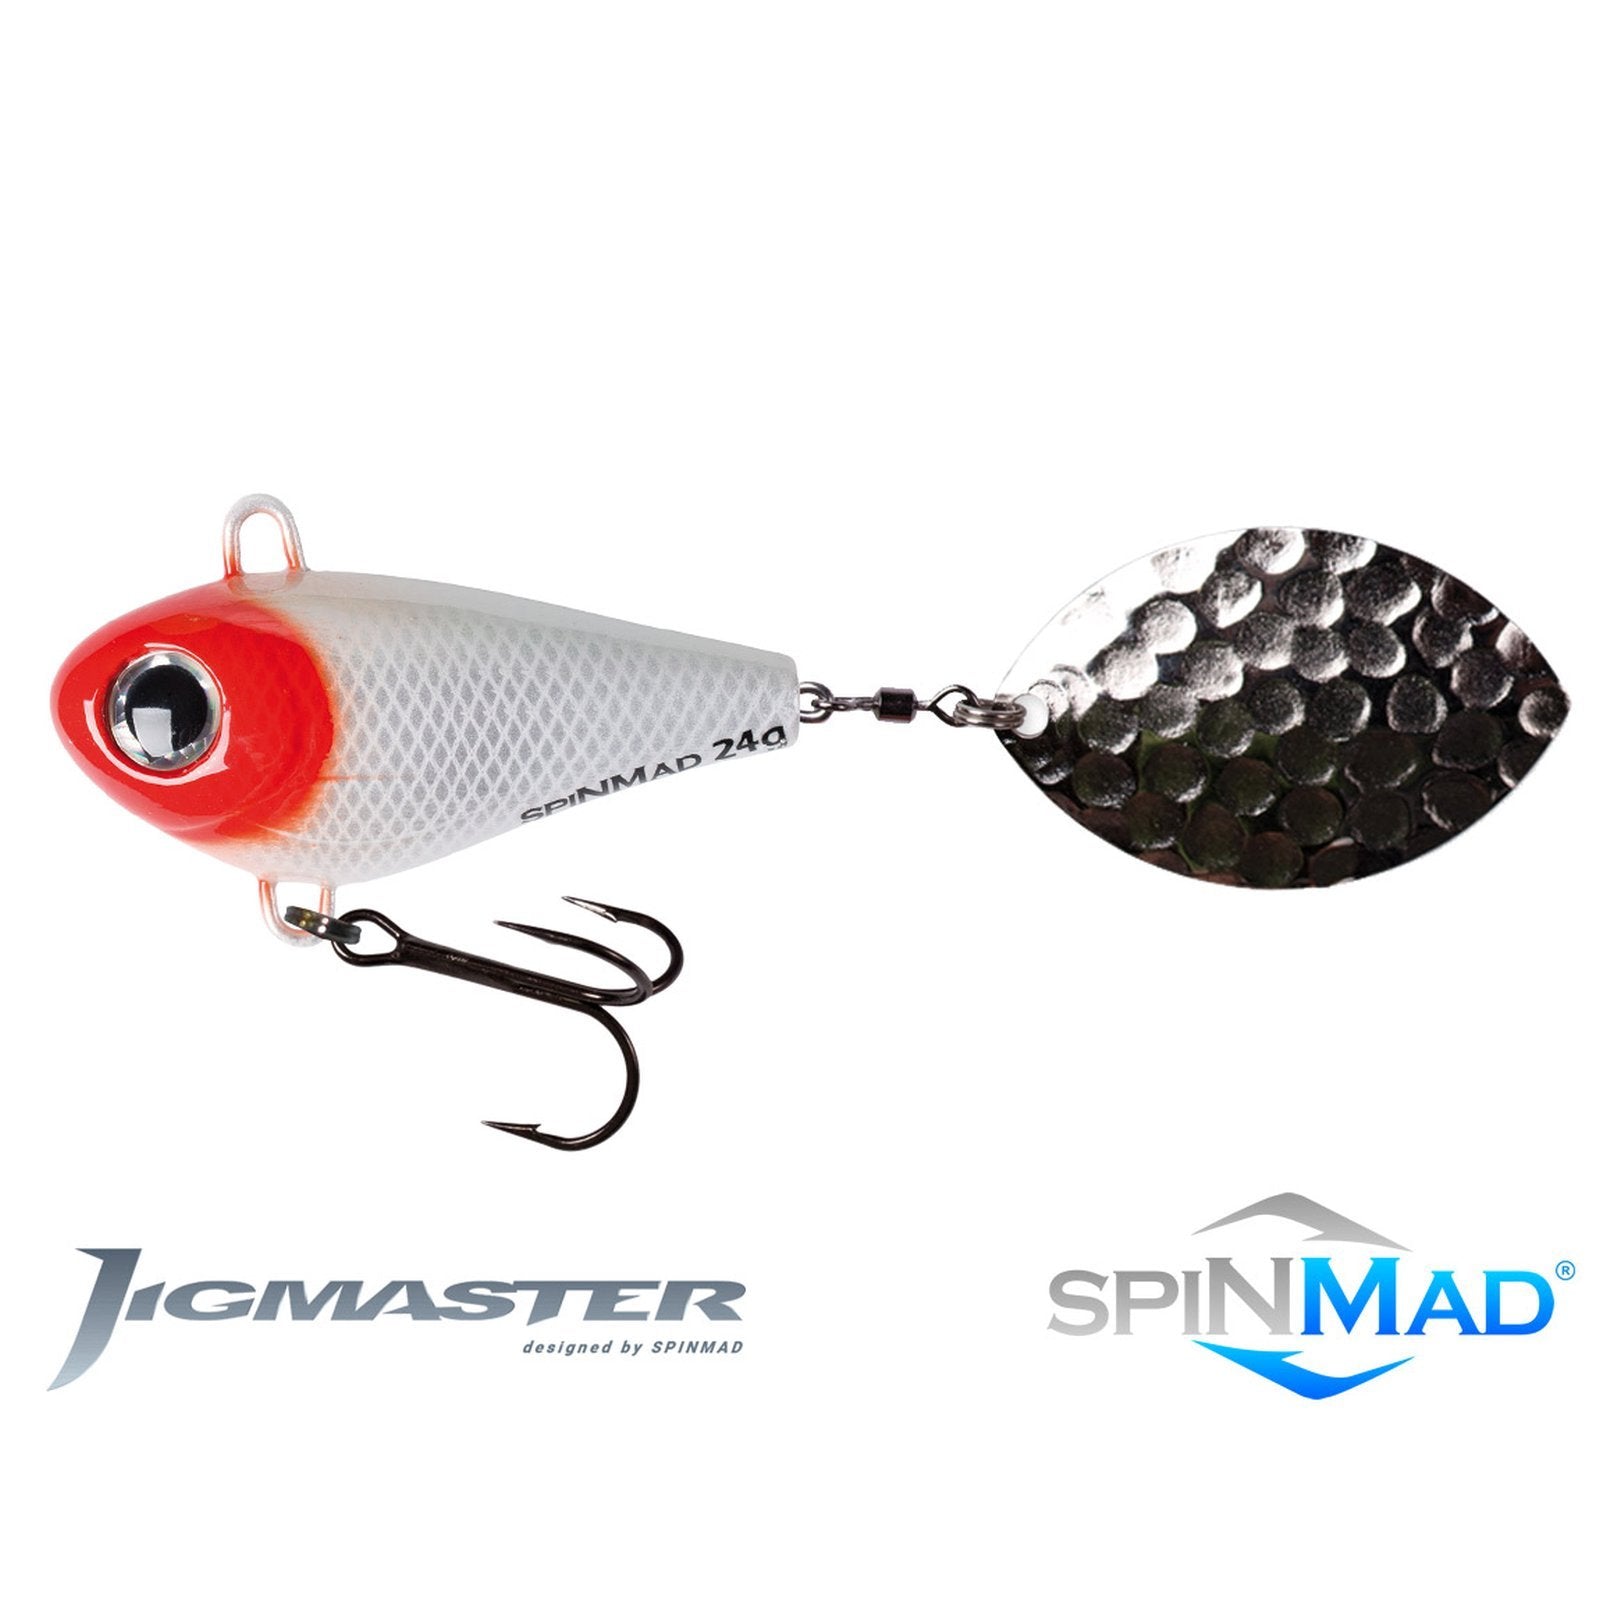 SpinMad Jigmaster 24 1515